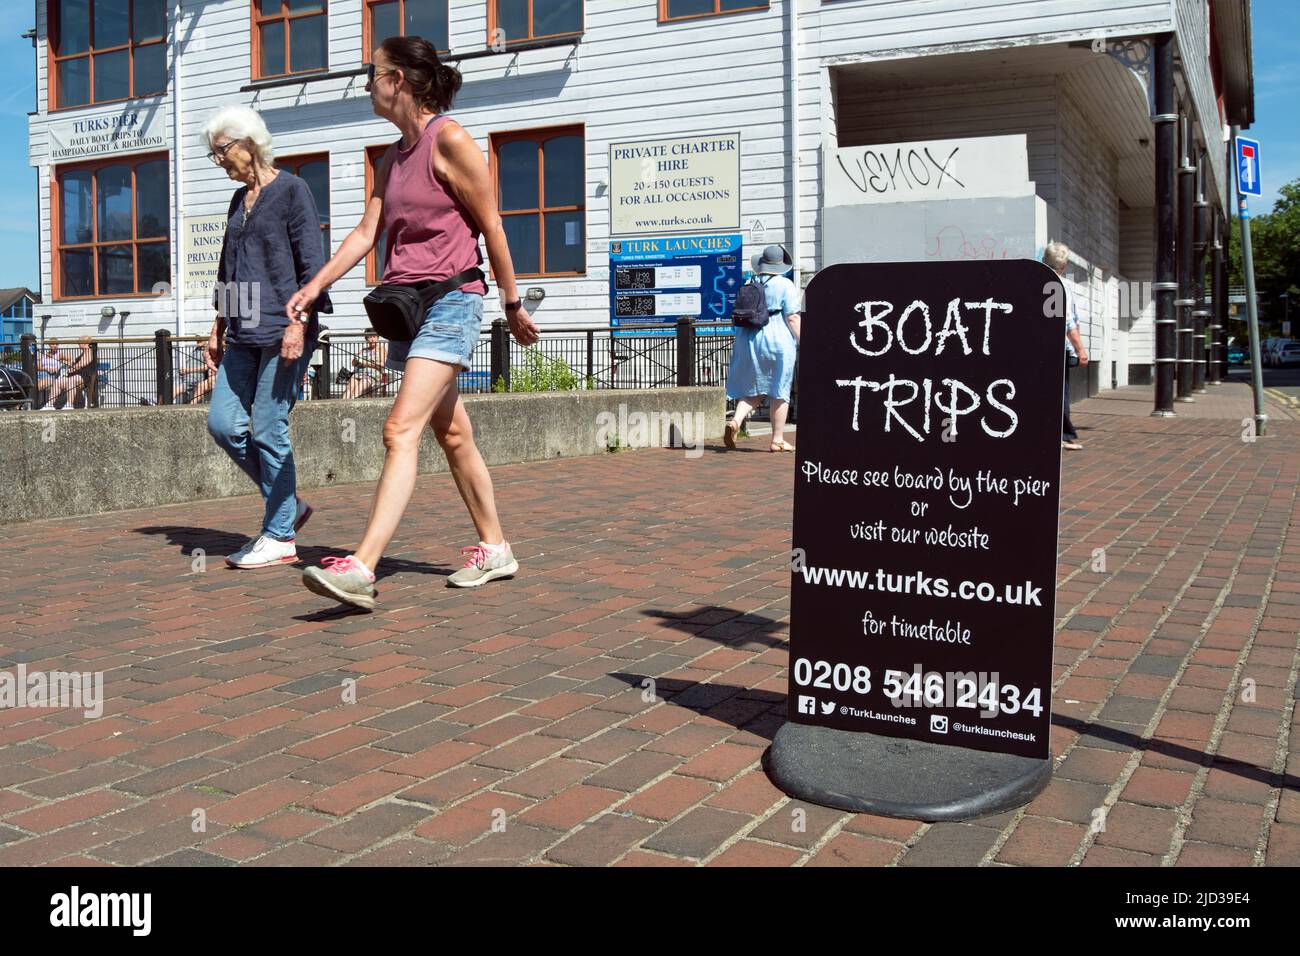 two women walk past a sign for boat trips, run by a company called turks, in kingston upon thames, surrey, england Stock Photo